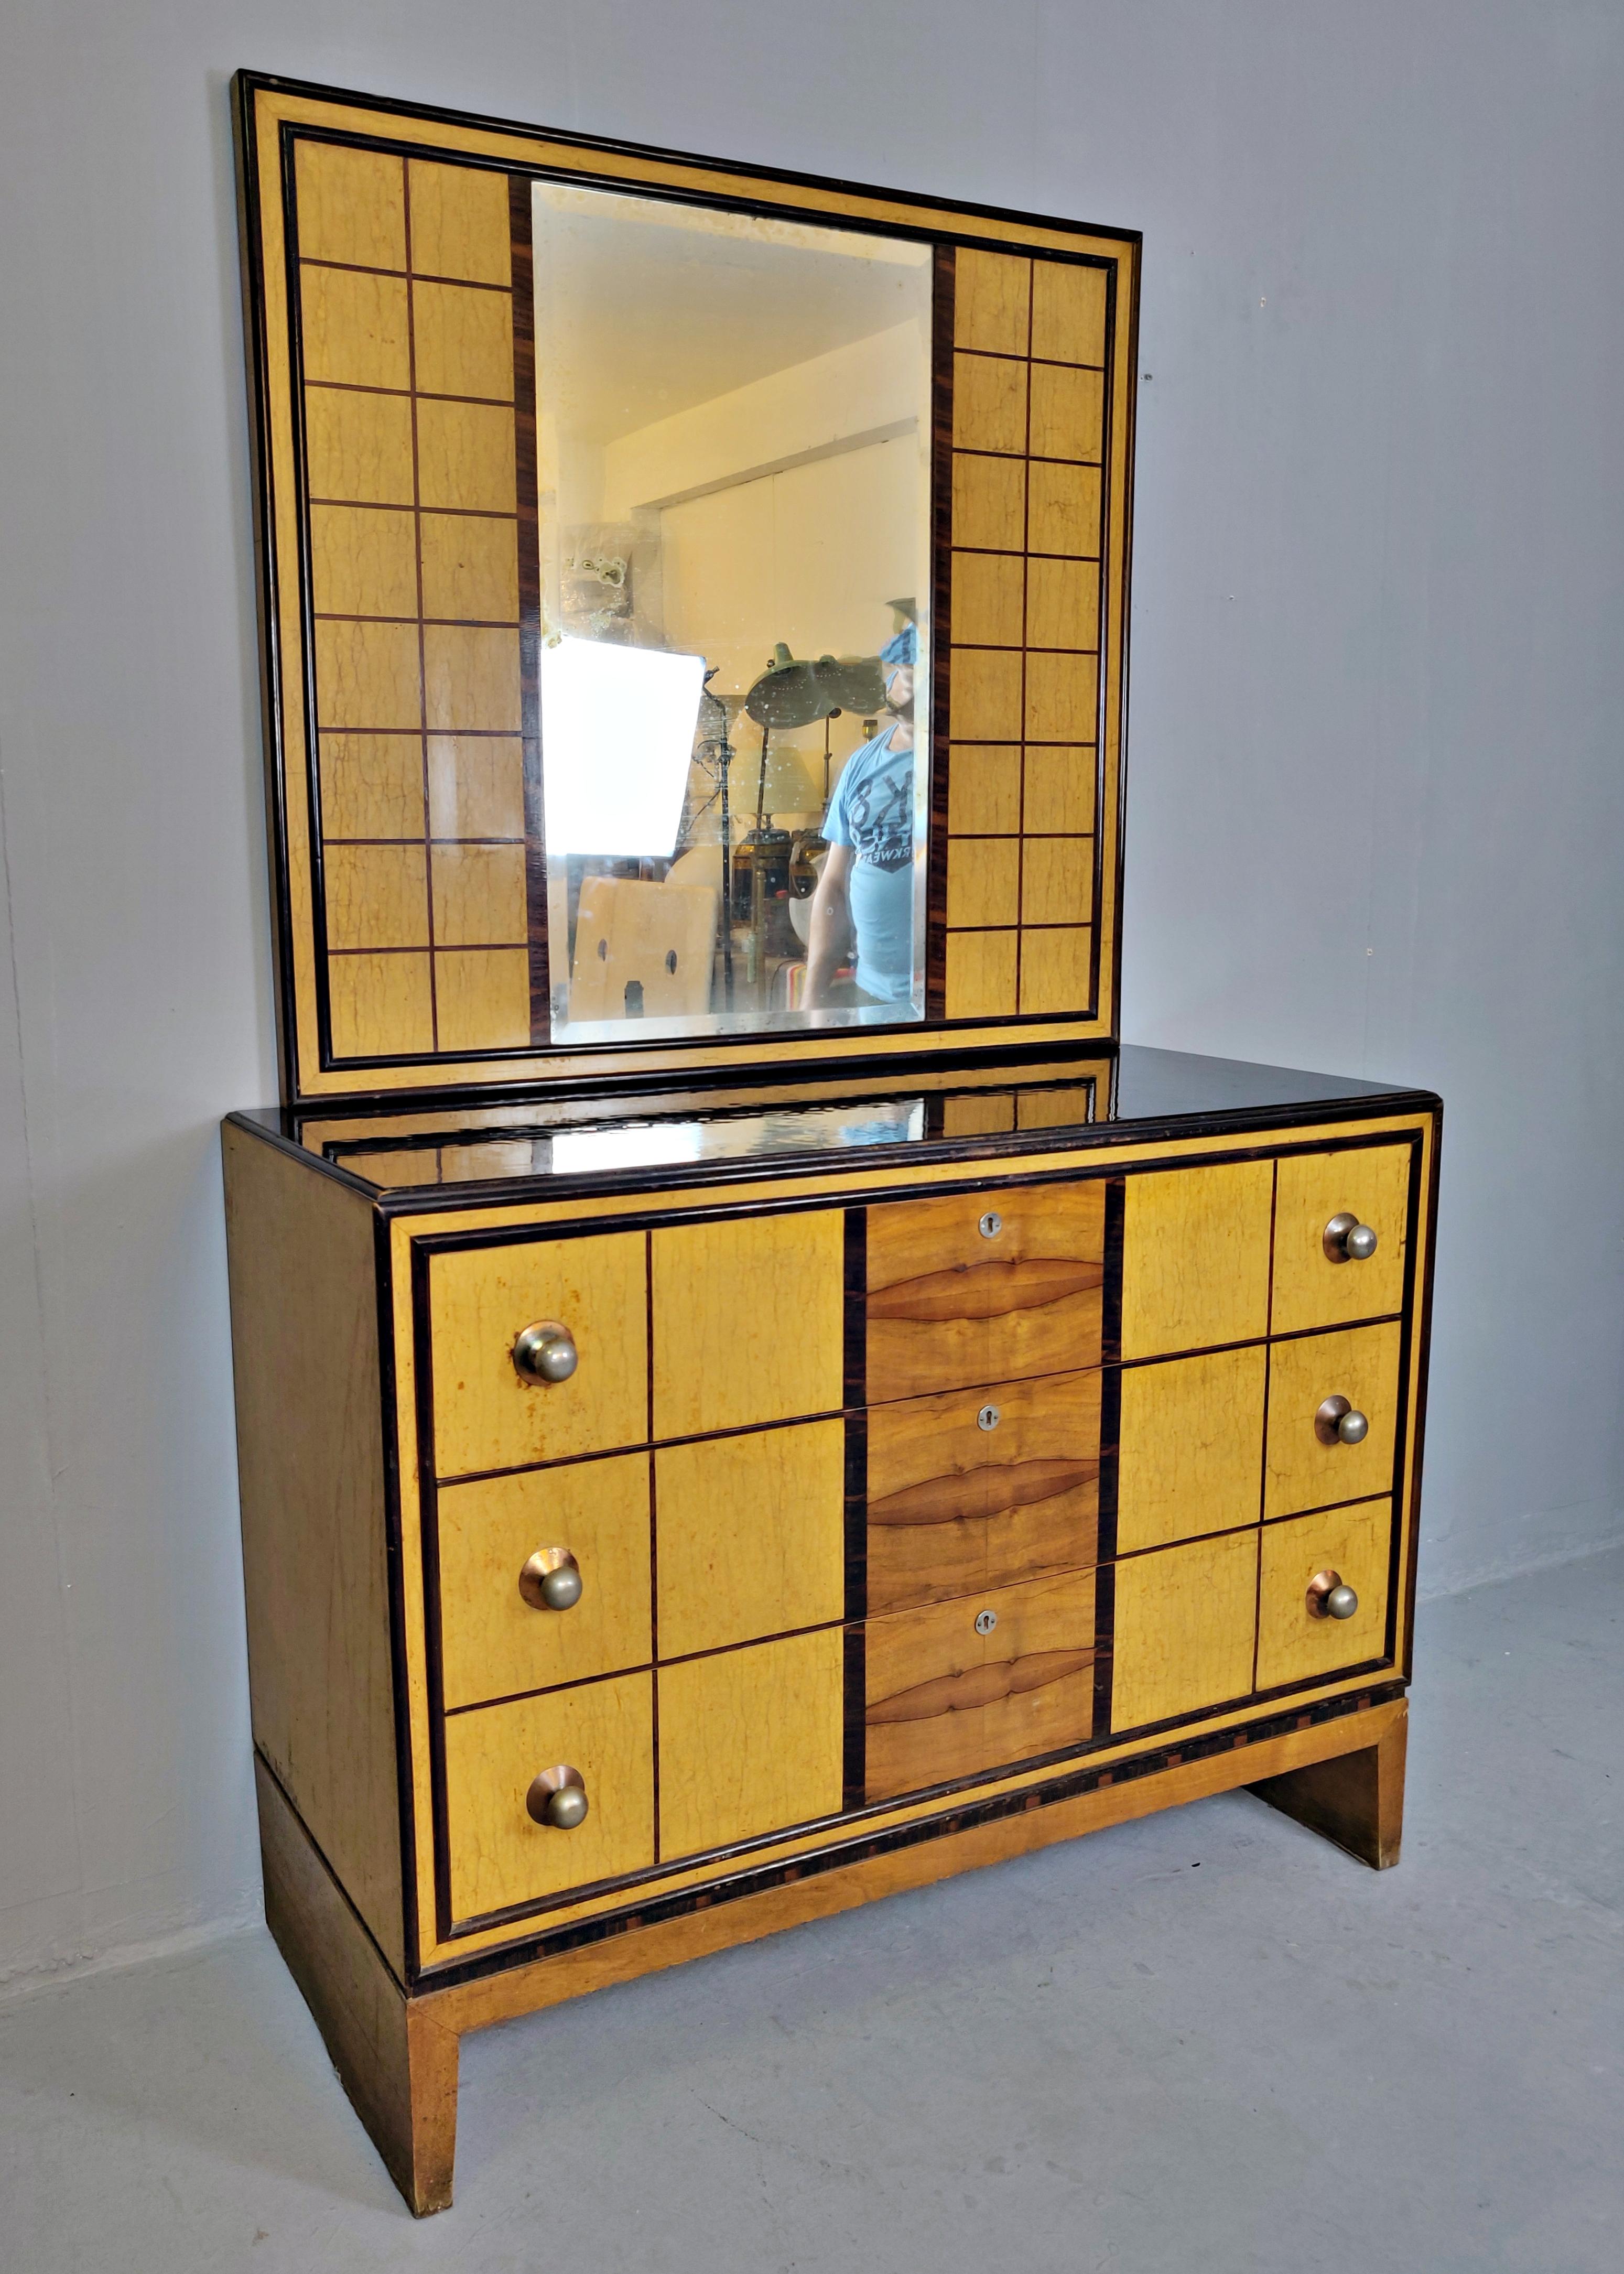 Italian Art Deco chest of drawers with standing mirror.